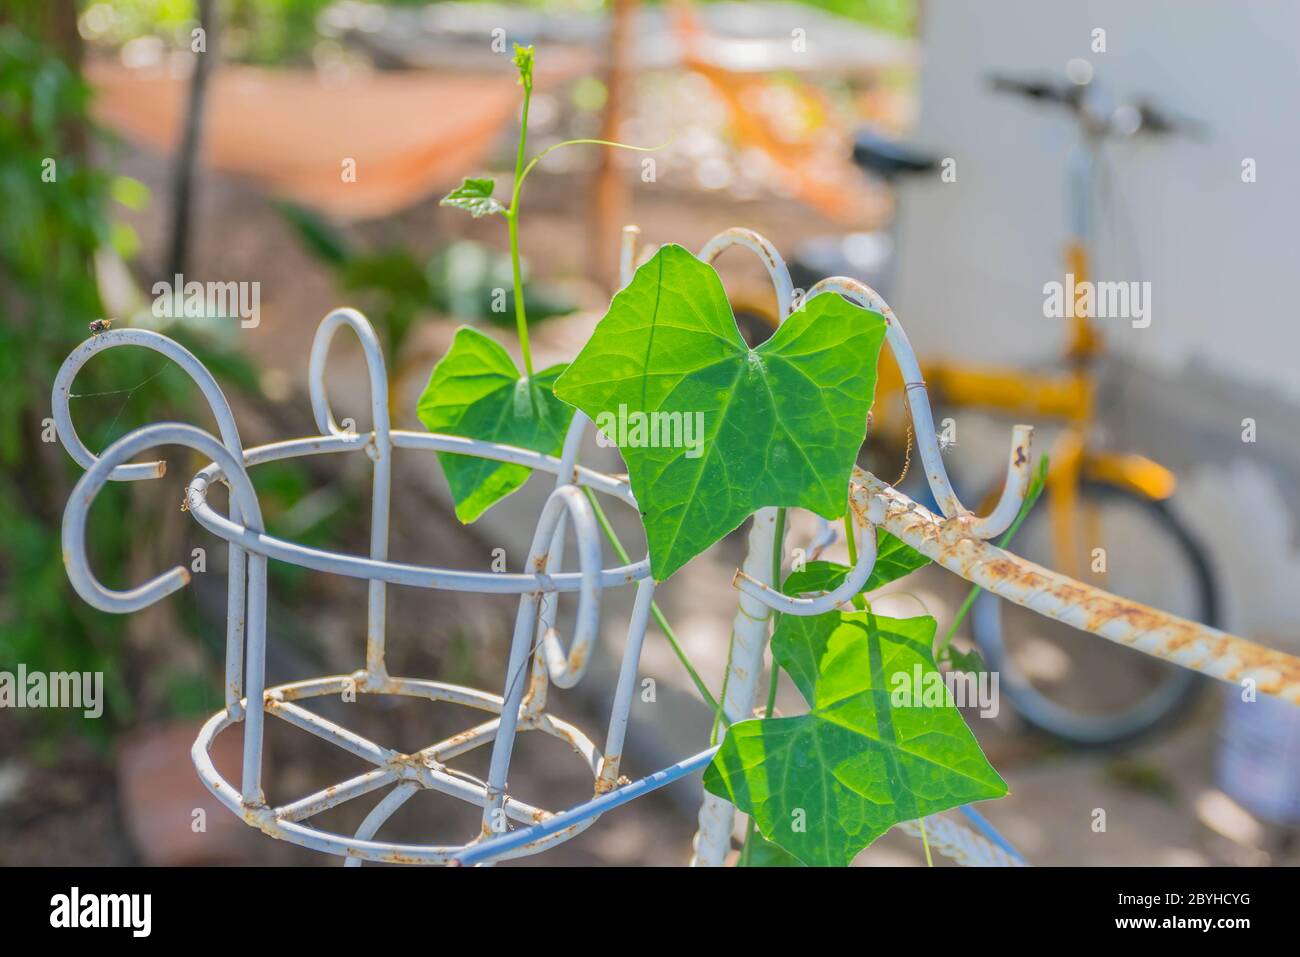 Coccinia,Coccinia grandis Voigt,Coccinia grandis,Cucurbitaceae, spiral vine and treetop of green plant on the metal basket. Stock Photo